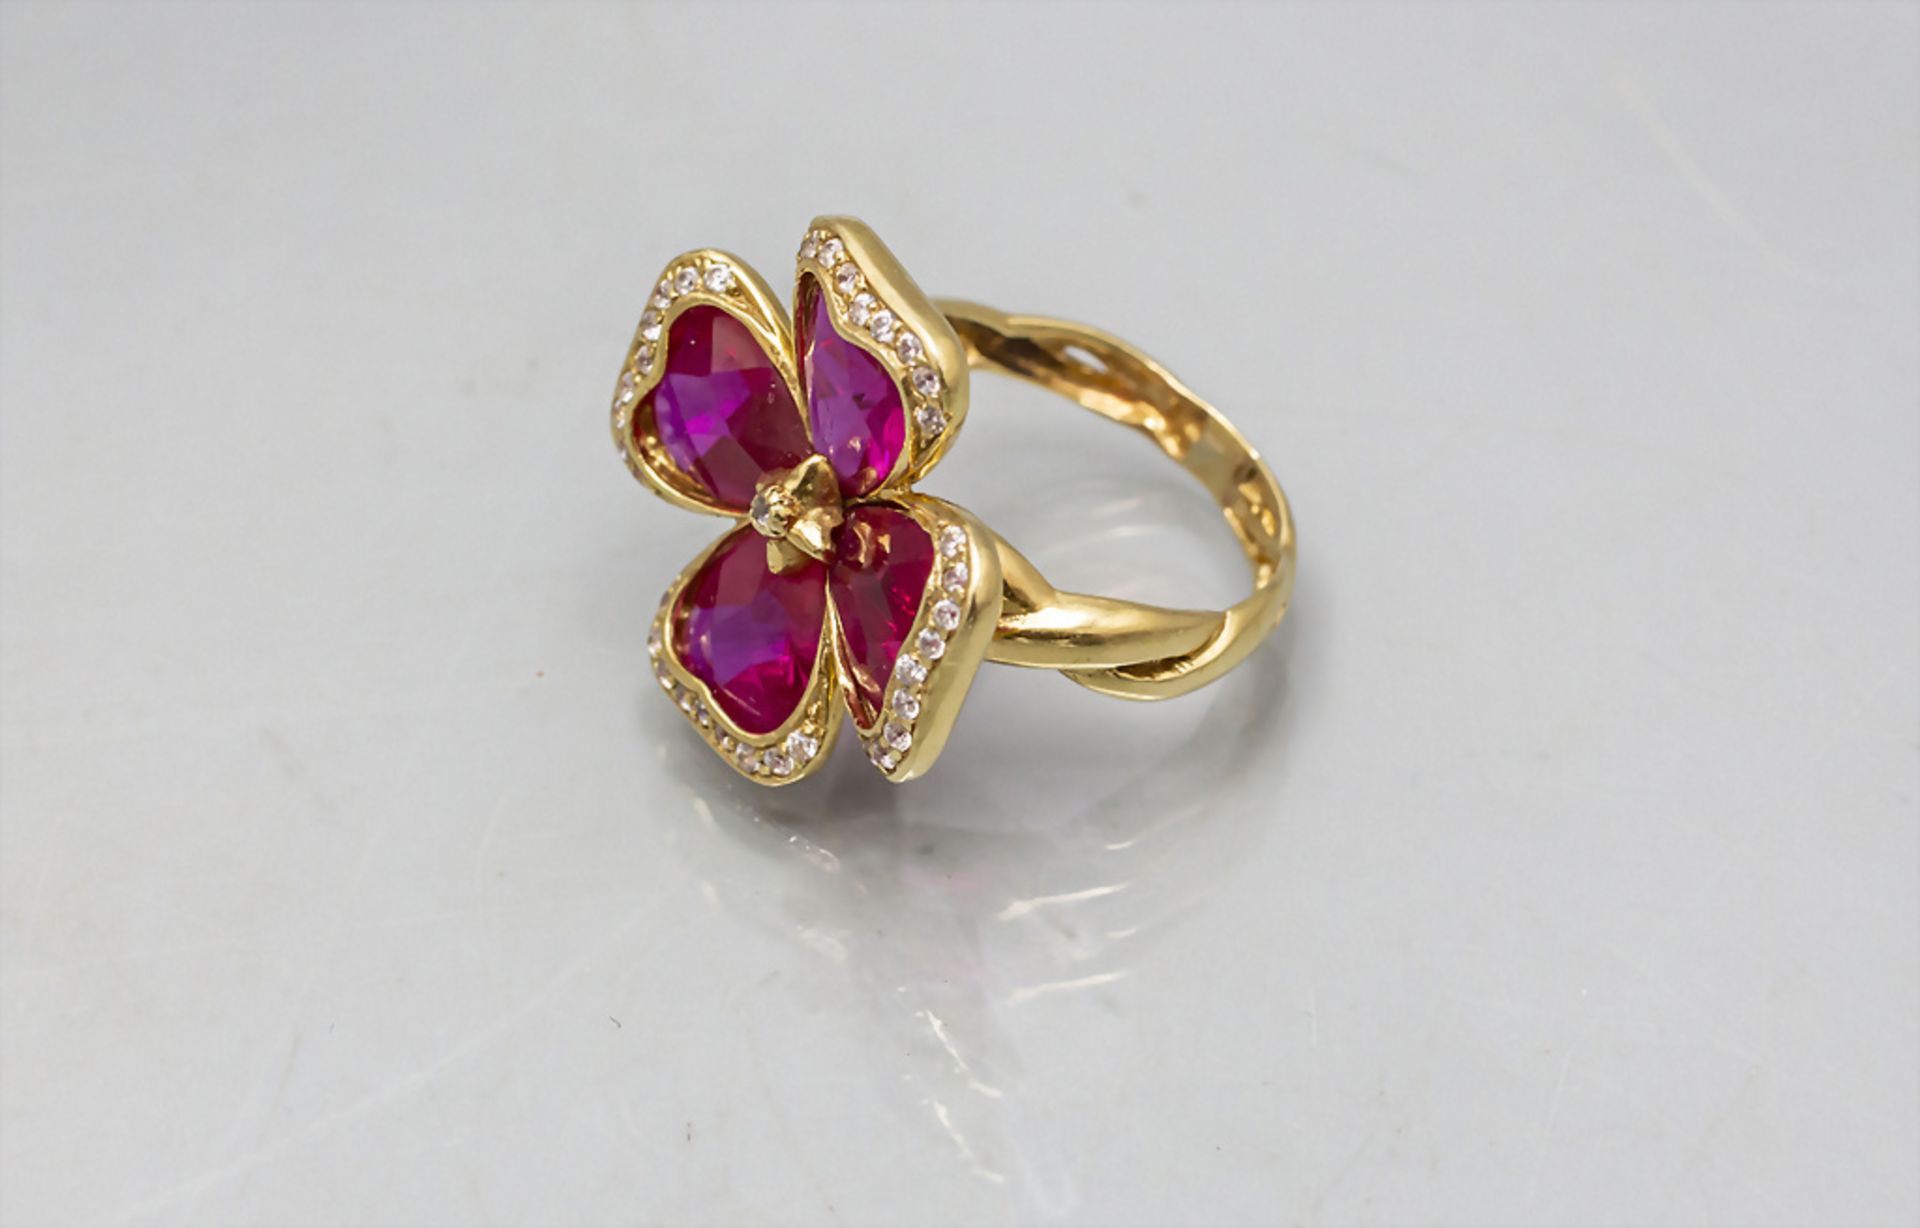 Damenring mit großer Blüte / A ladies 14 ct gold ring with a blossom, 2. Hälfte 20. Jh. - Image 2 of 3